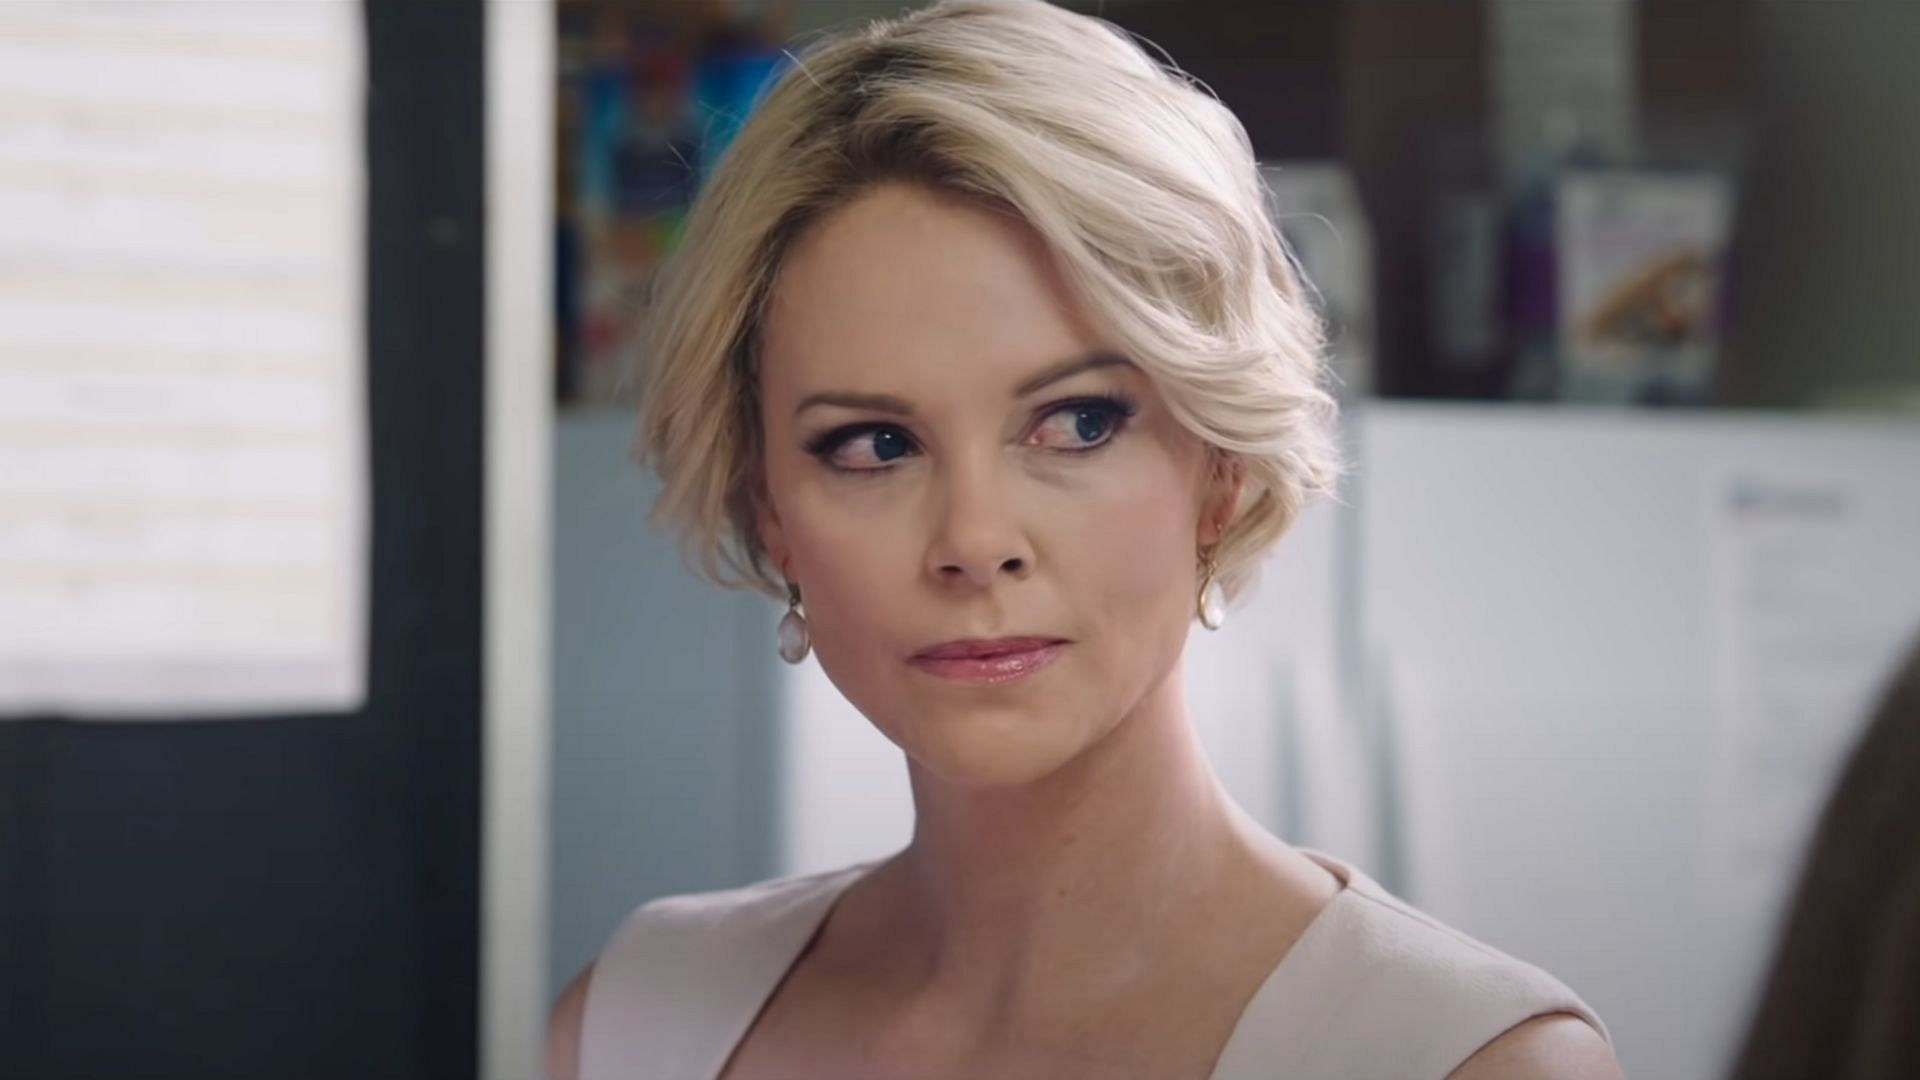 Charlize Theron was nominated at Academy Awards for portraying Megyn Kelly in the 2019 film Bombshell (Image via Lionsgate Movies)